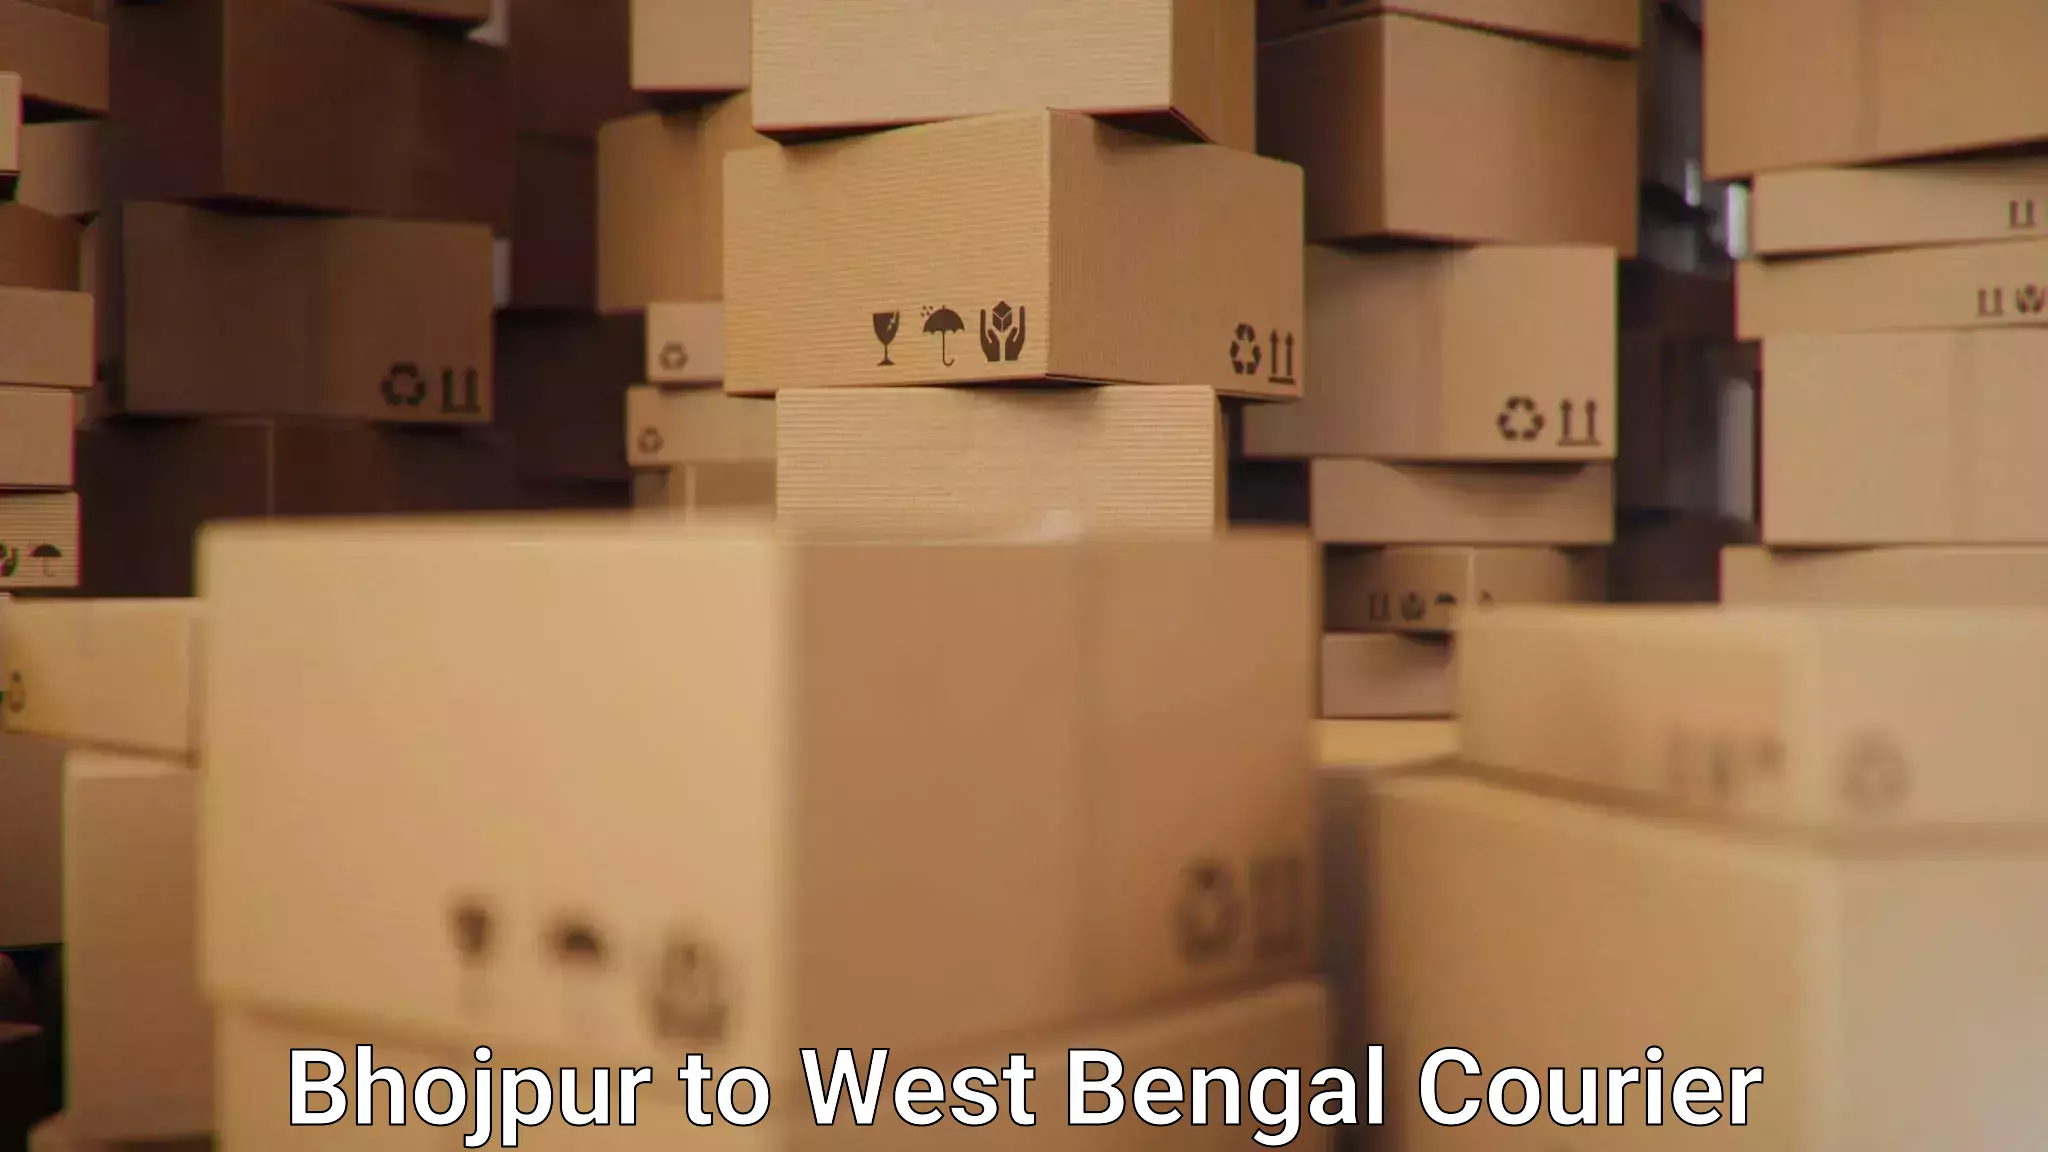 Multi-modal transportation in Bhojpur to West Bengal